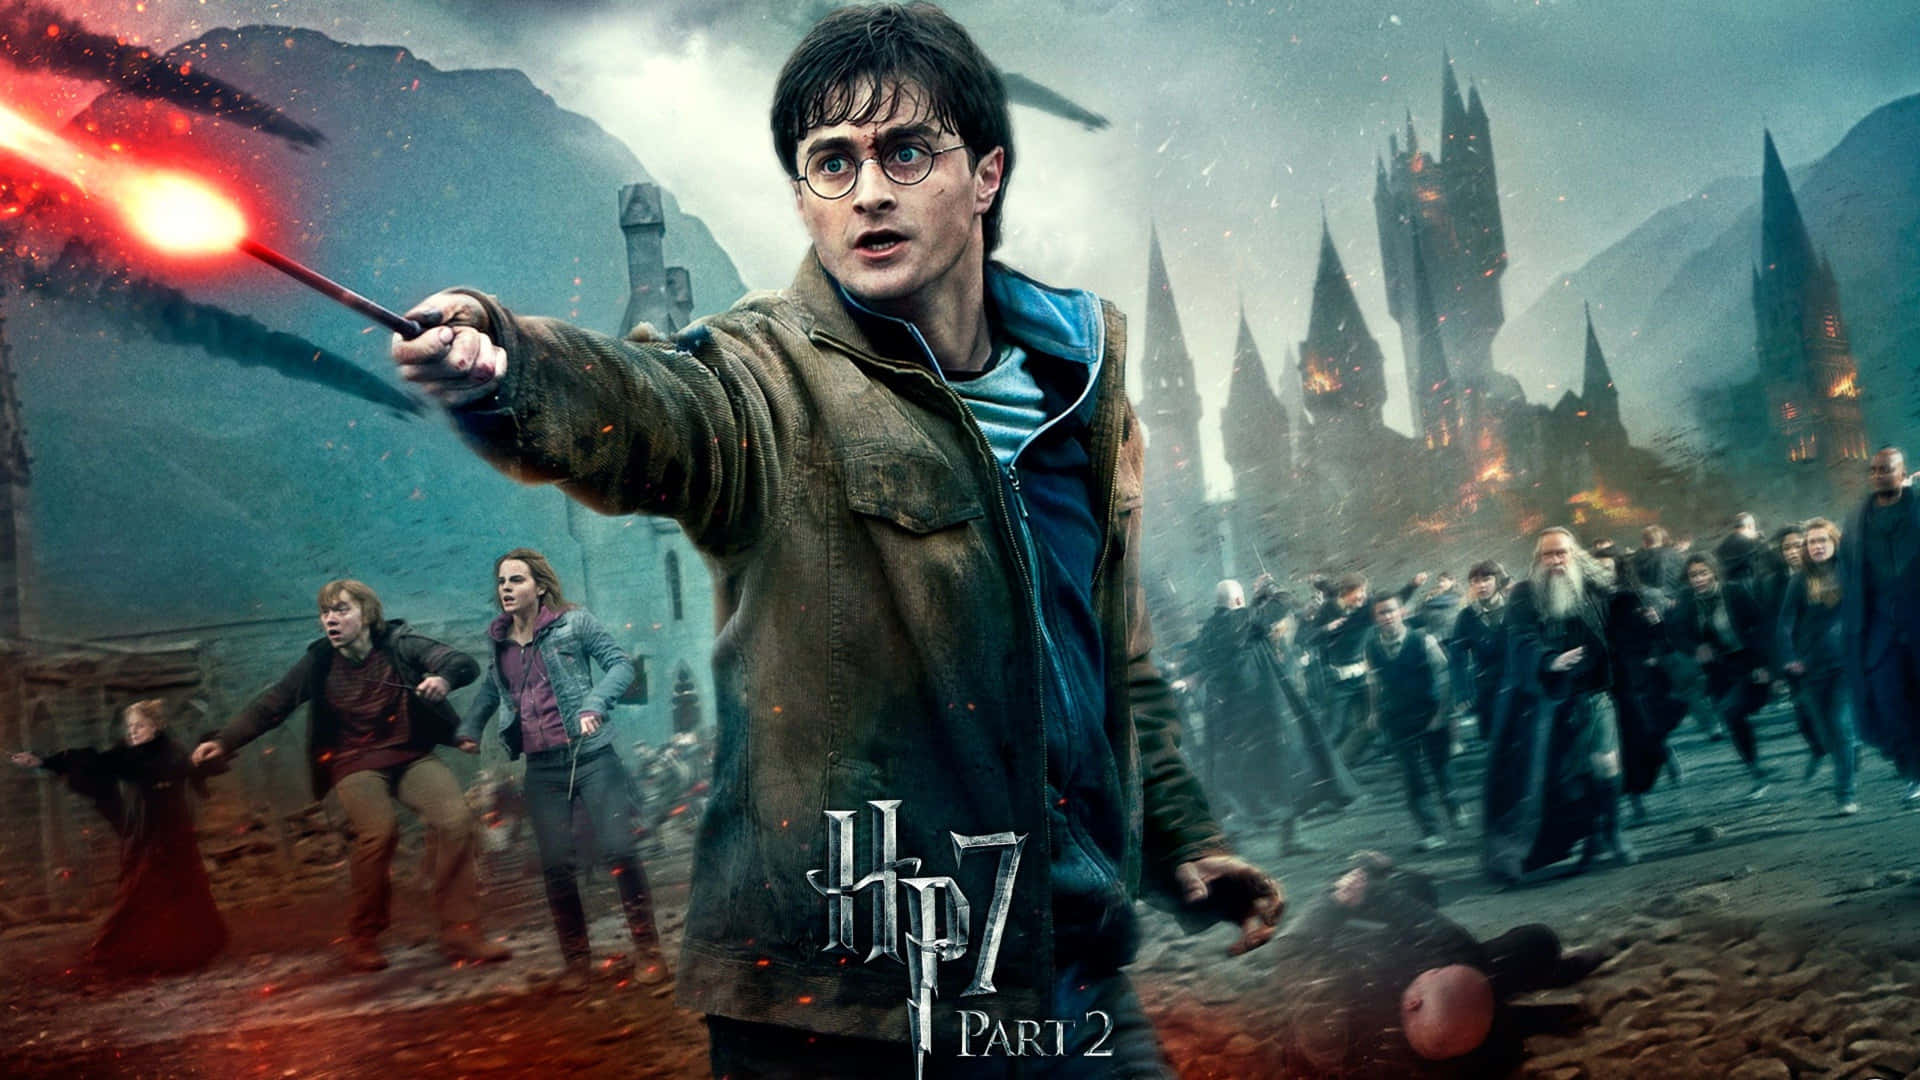 Download Unlock the power of 4K with the stunning Harry Potter 4K Ultra  High Definition Wallpaper Wallpaper